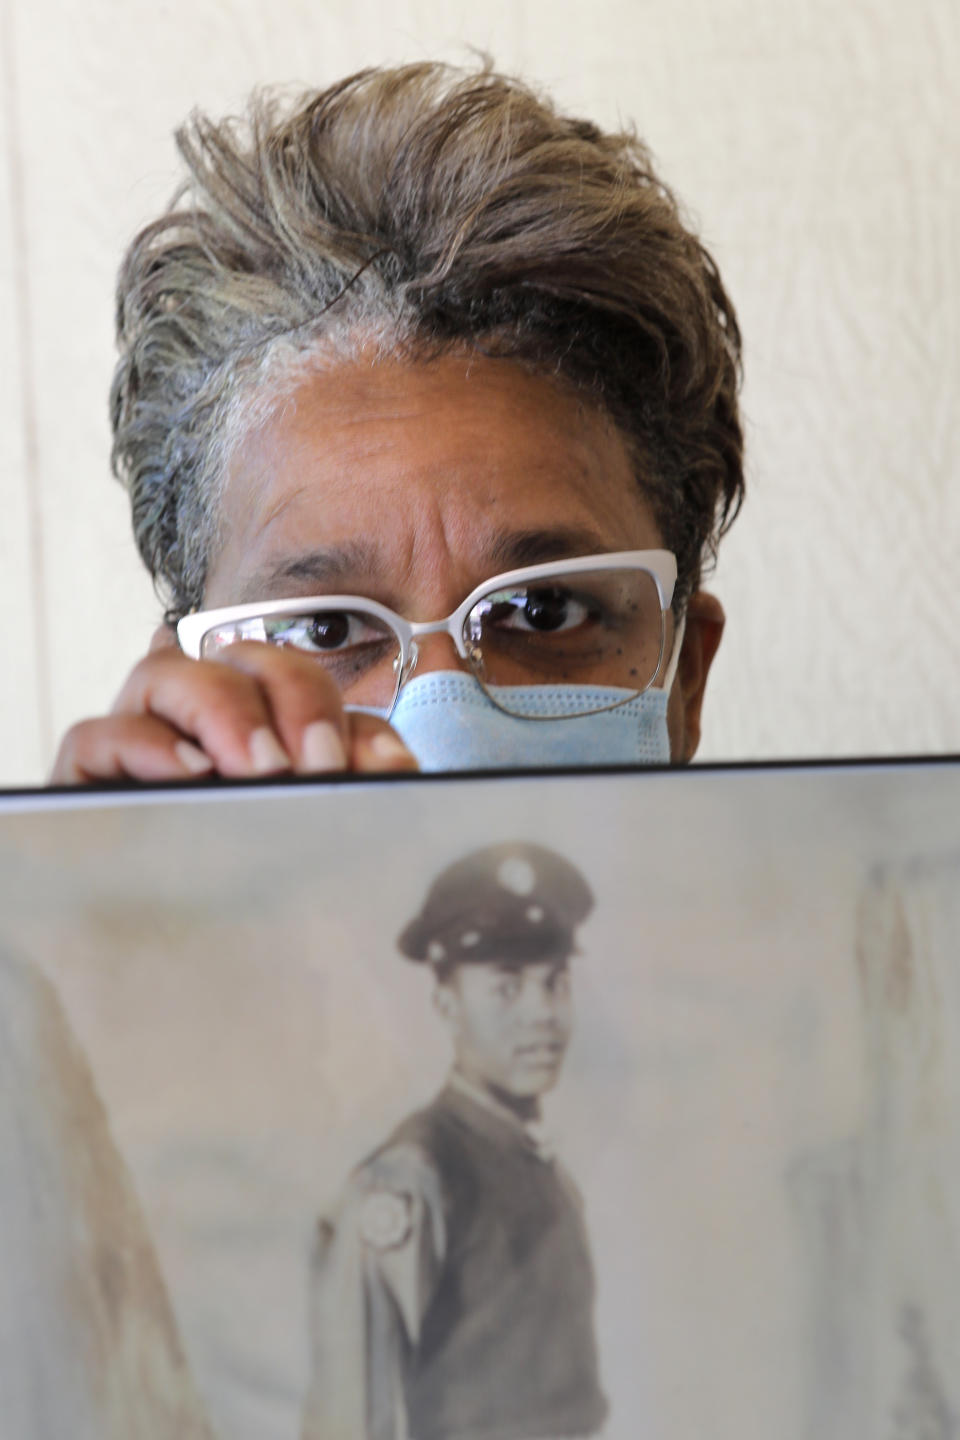 In this Monday, May 18, 2020 photo, Belvin Jefferson White poses with a portrait of her father Saymon Jefferson at Saymon's home in Baton Rouge, La. Belvin recently lost both her father and her uncle, Willie Lee Jefferson, to COVID-19. (AP Photo/Gerald Herbert)